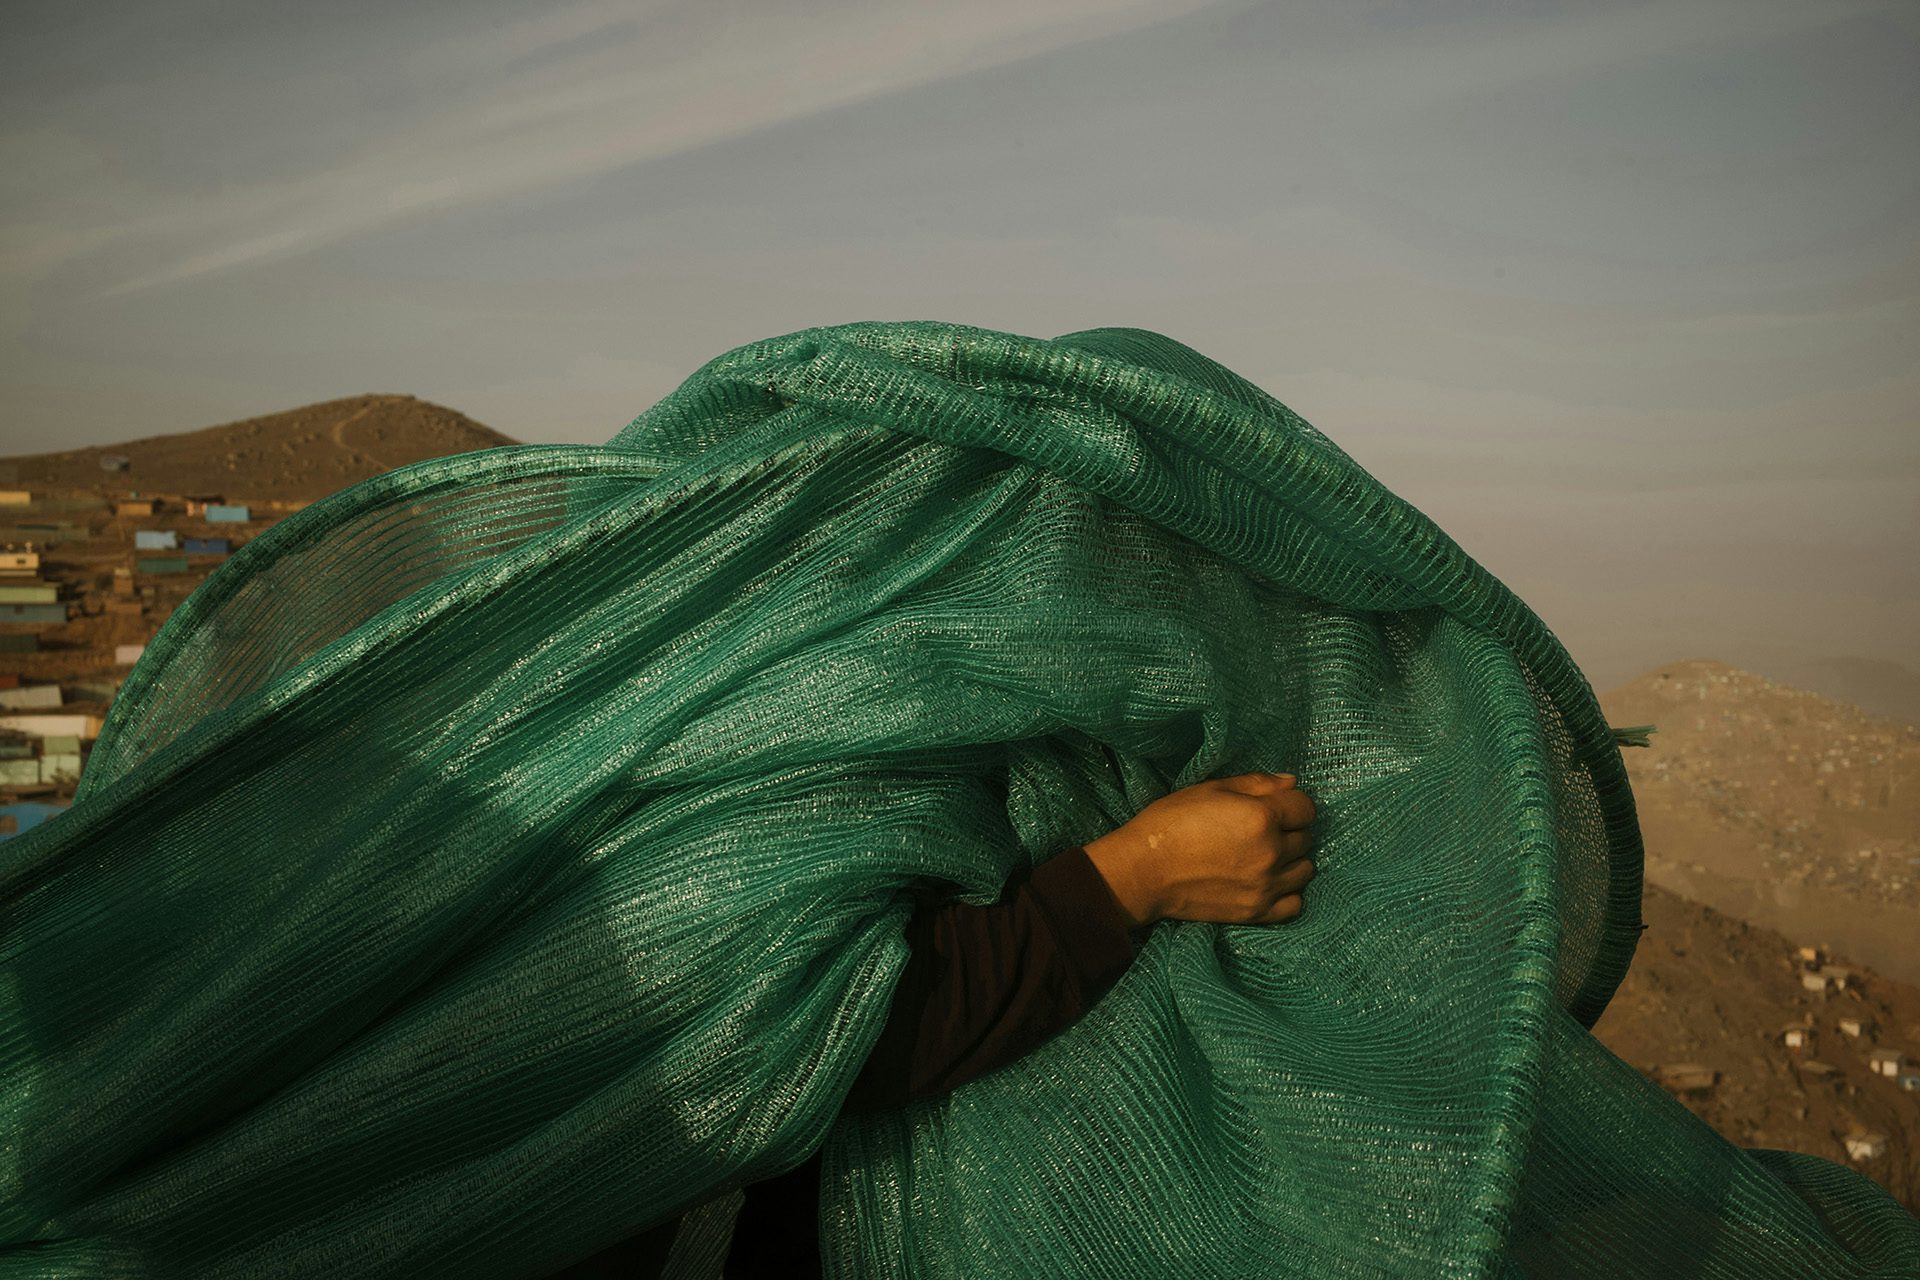 Photograph of a person carrying a green that's concealing their face, from the Sony World Photo Awards 2023